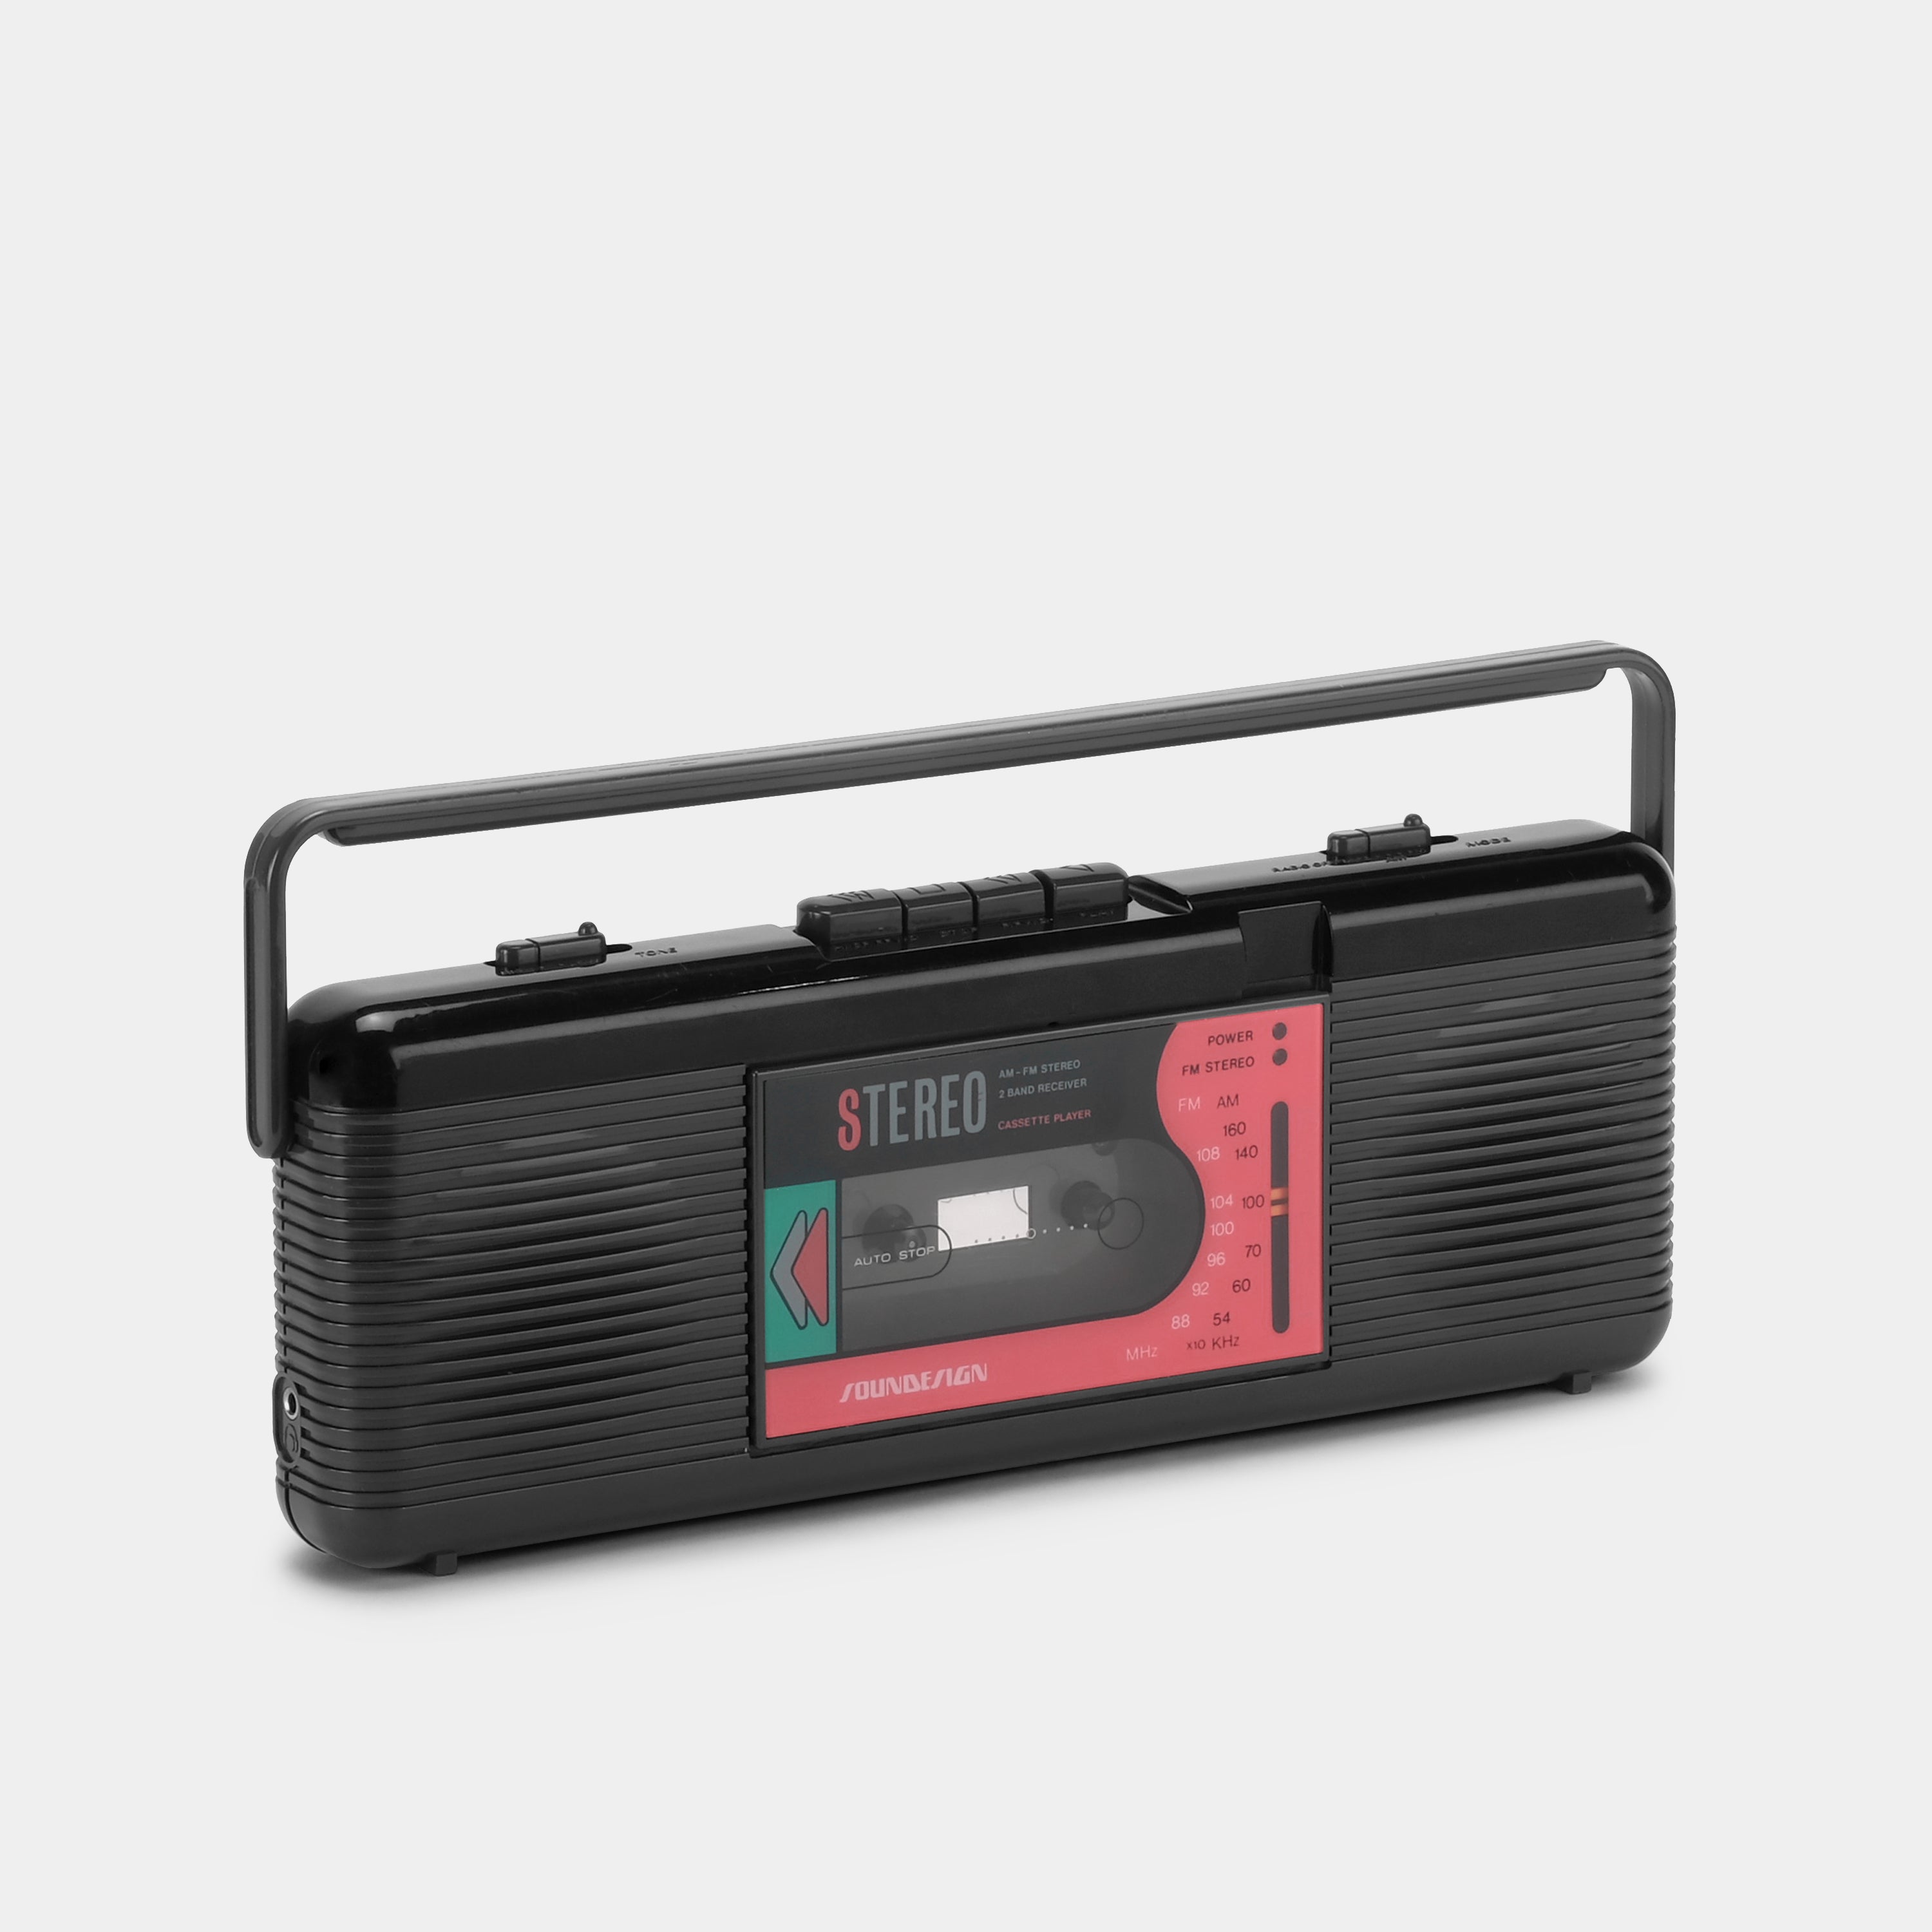 Soundesign 4611 AM/FM Stereo Boombox Cassette Player